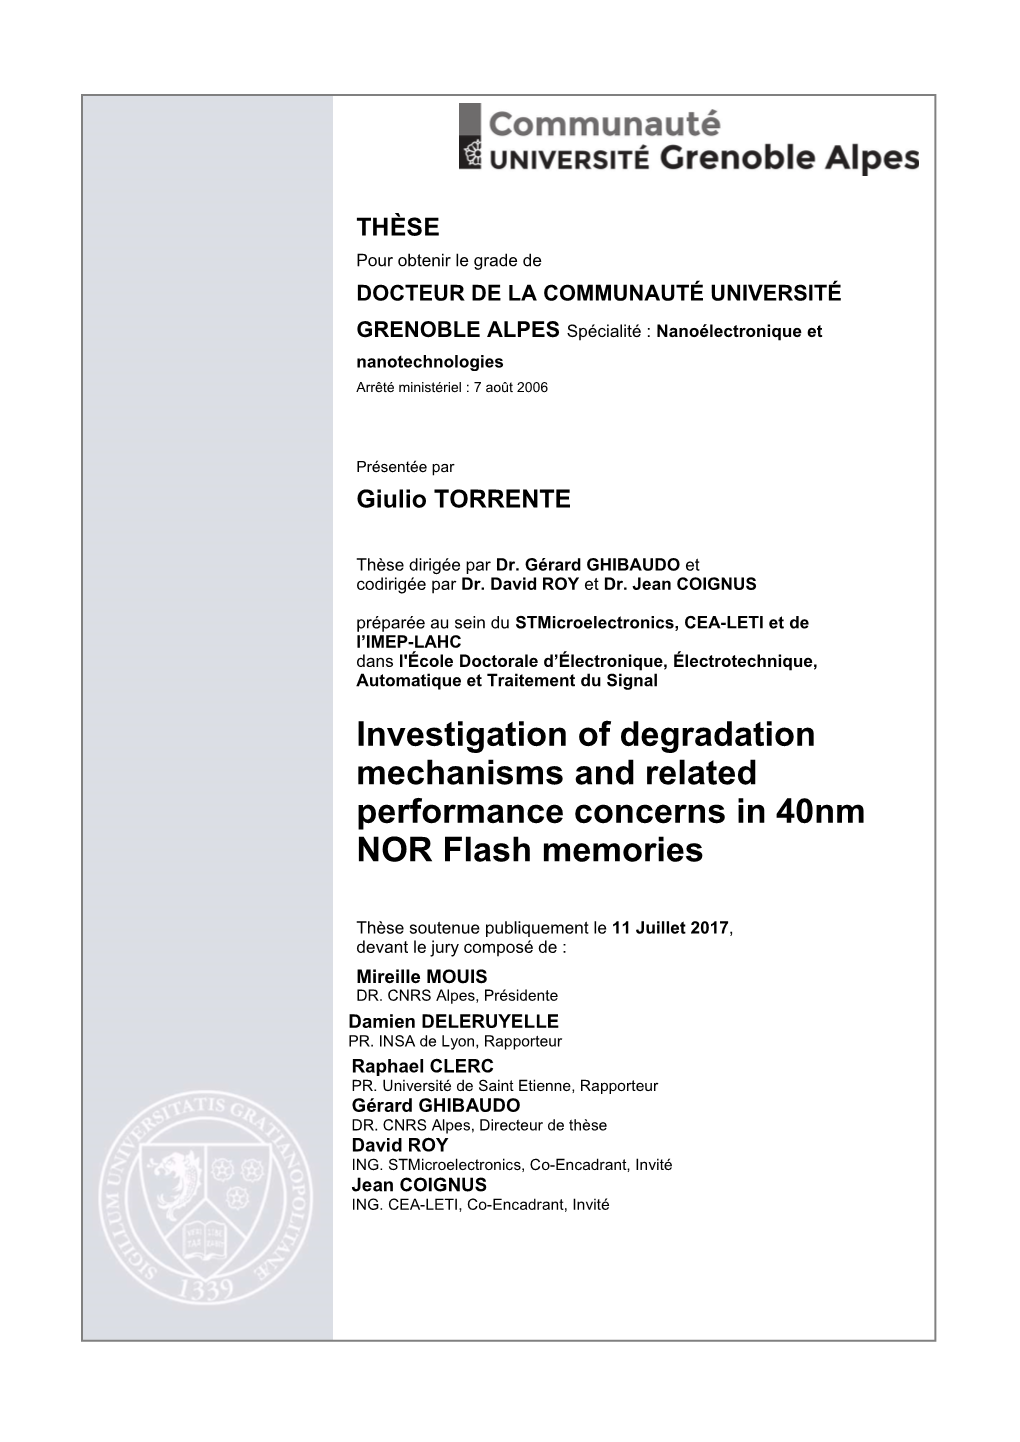 Investigation of Degradation Mechanisms and Related Performance Concerns in 40Nm NOR Flash Memories